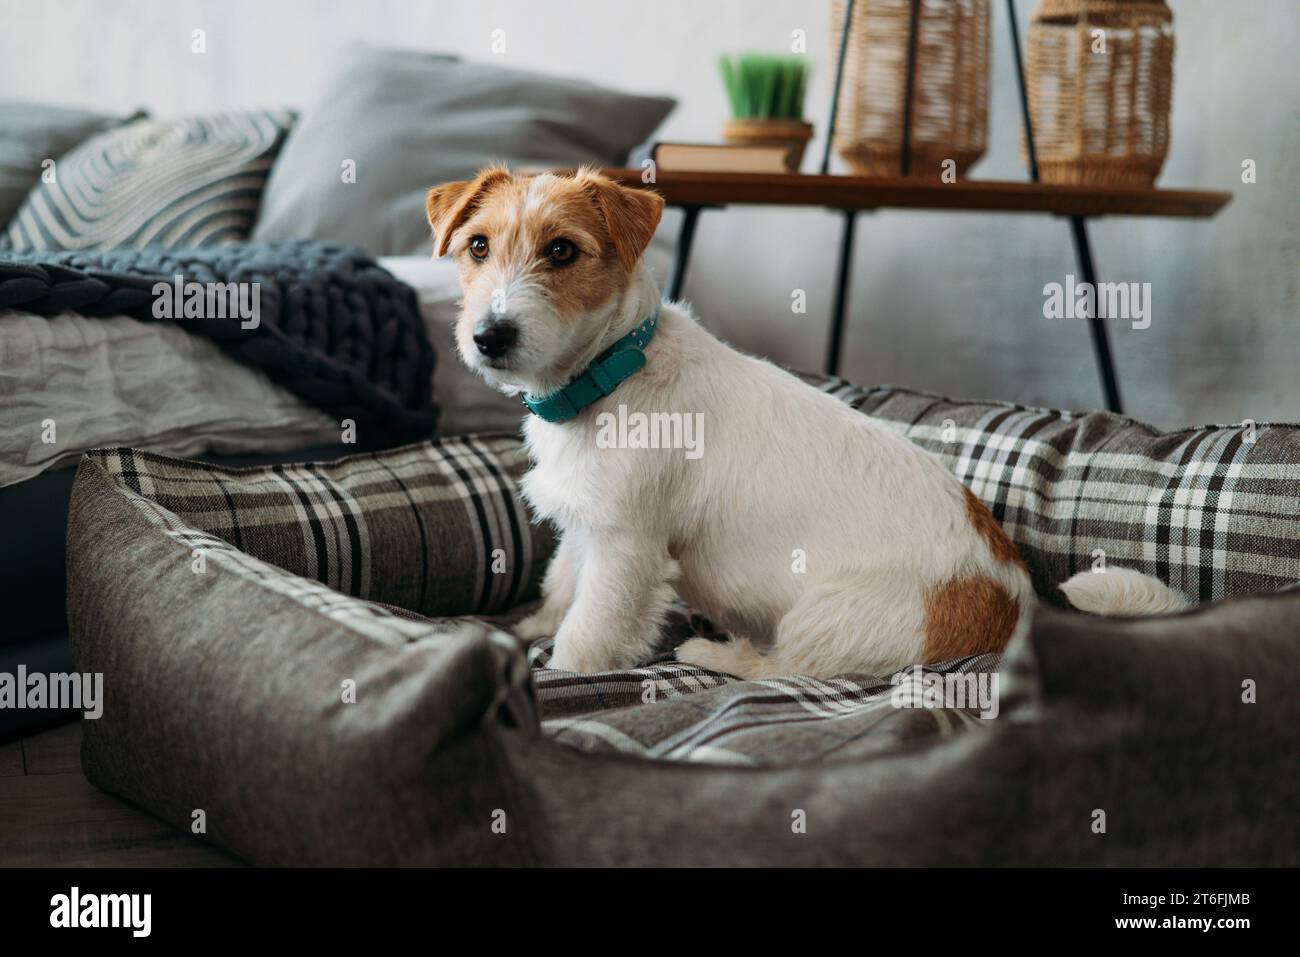 Portrait of a rough-coated jack russell terrier sitting in a dog bed. A small rough-coated dog with funny fur spots rests in a deckchair in a home int Stock Photo